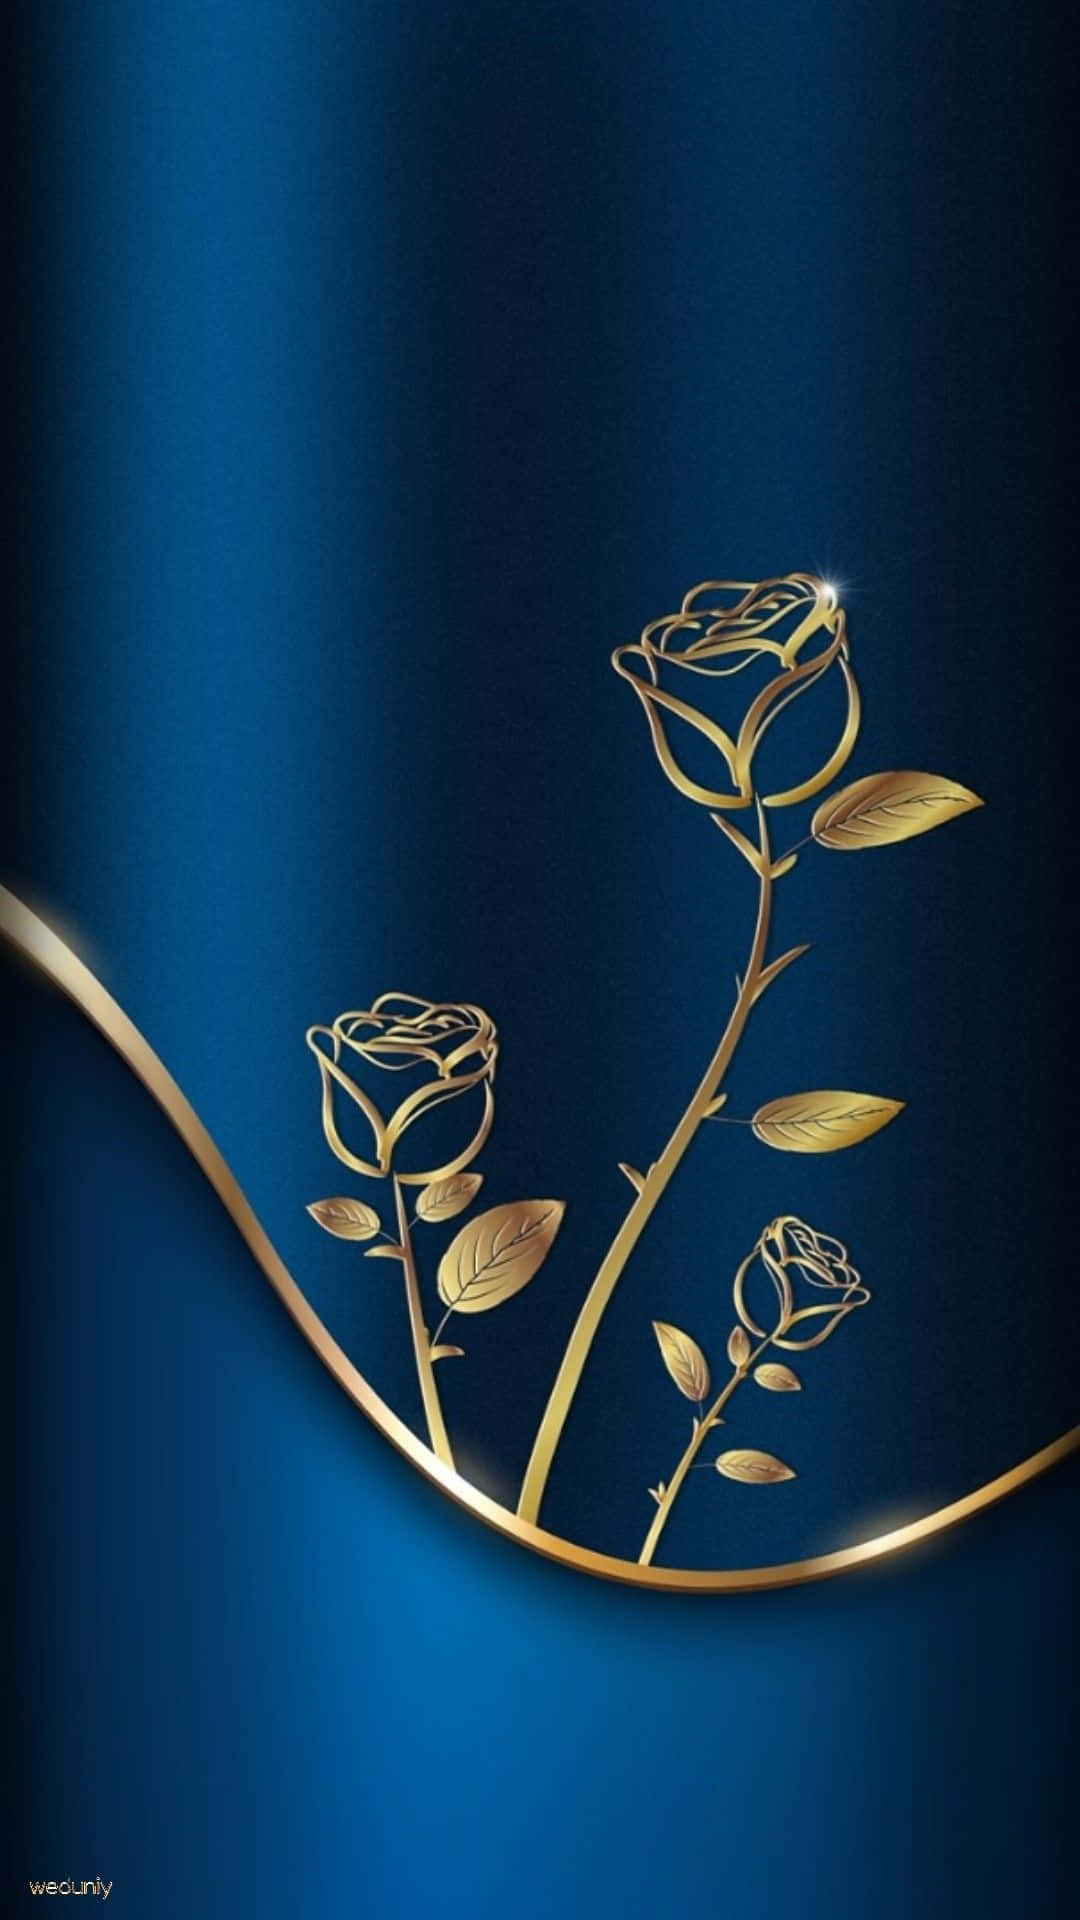 An eye-catching royal blue and gold background